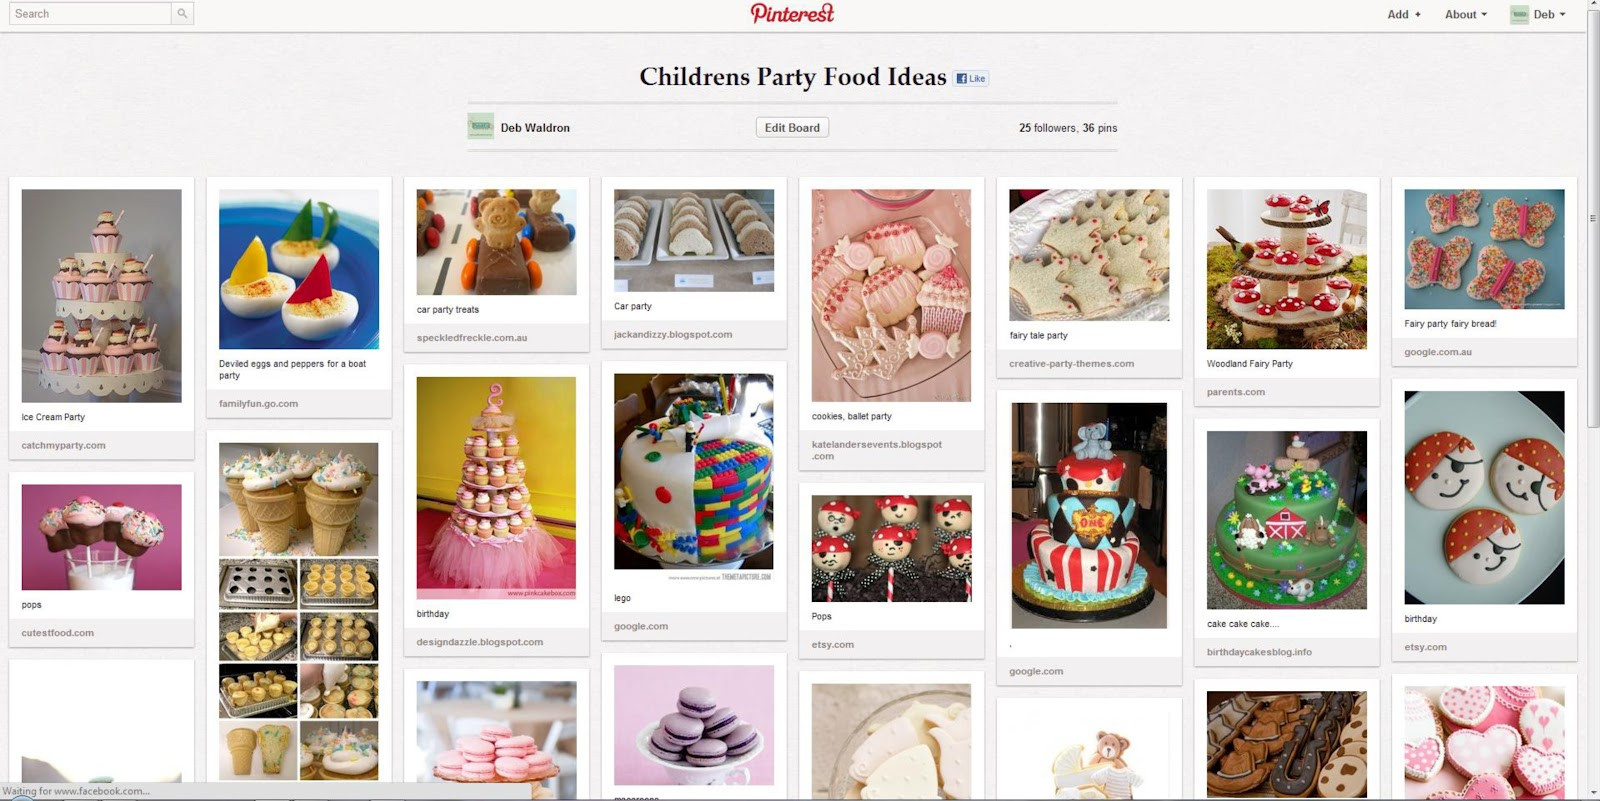 Party Food Ideas Pinterest
 PartyandCo Children s Party Food Ideas on Pinterest